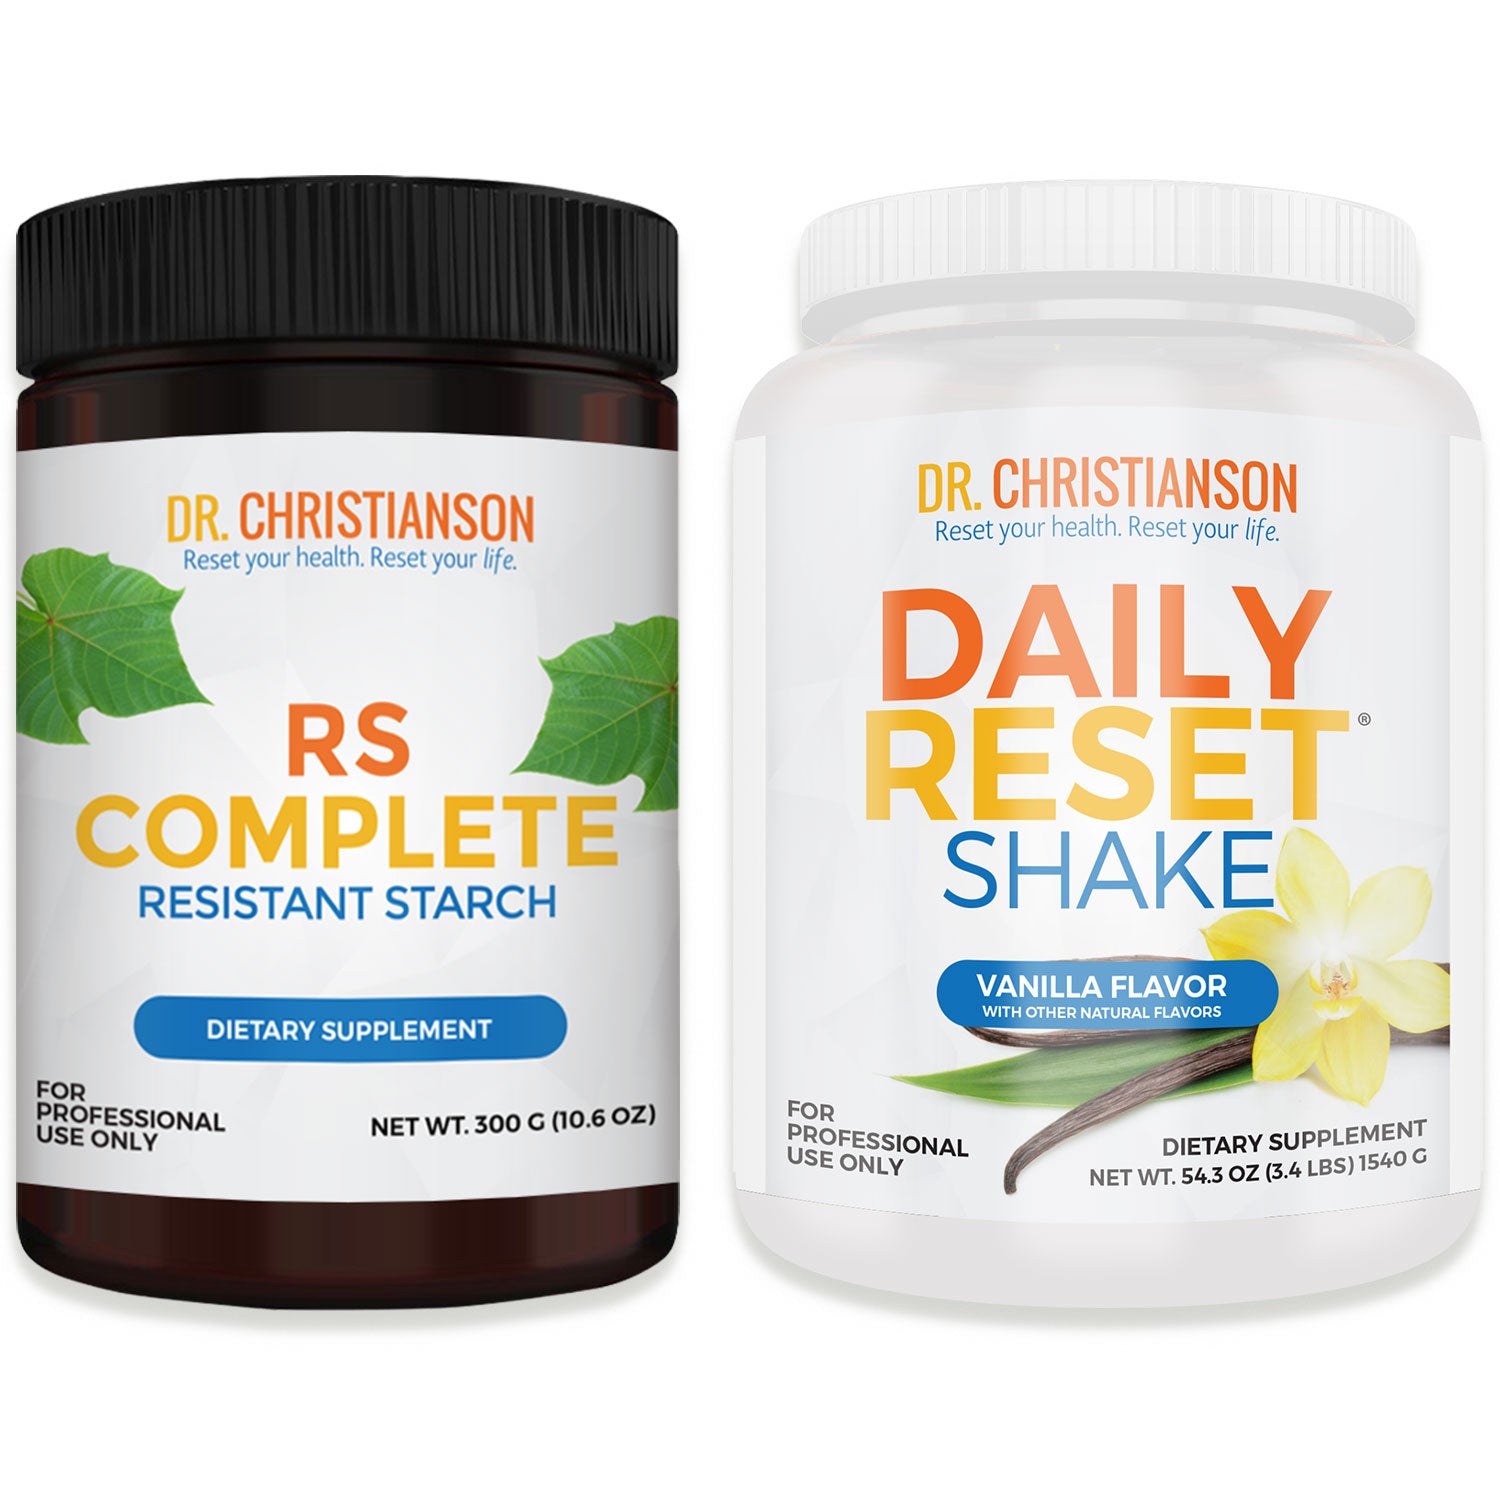 Daily Reset Shake and RS Complete Bundle - Chocolate is out of stock